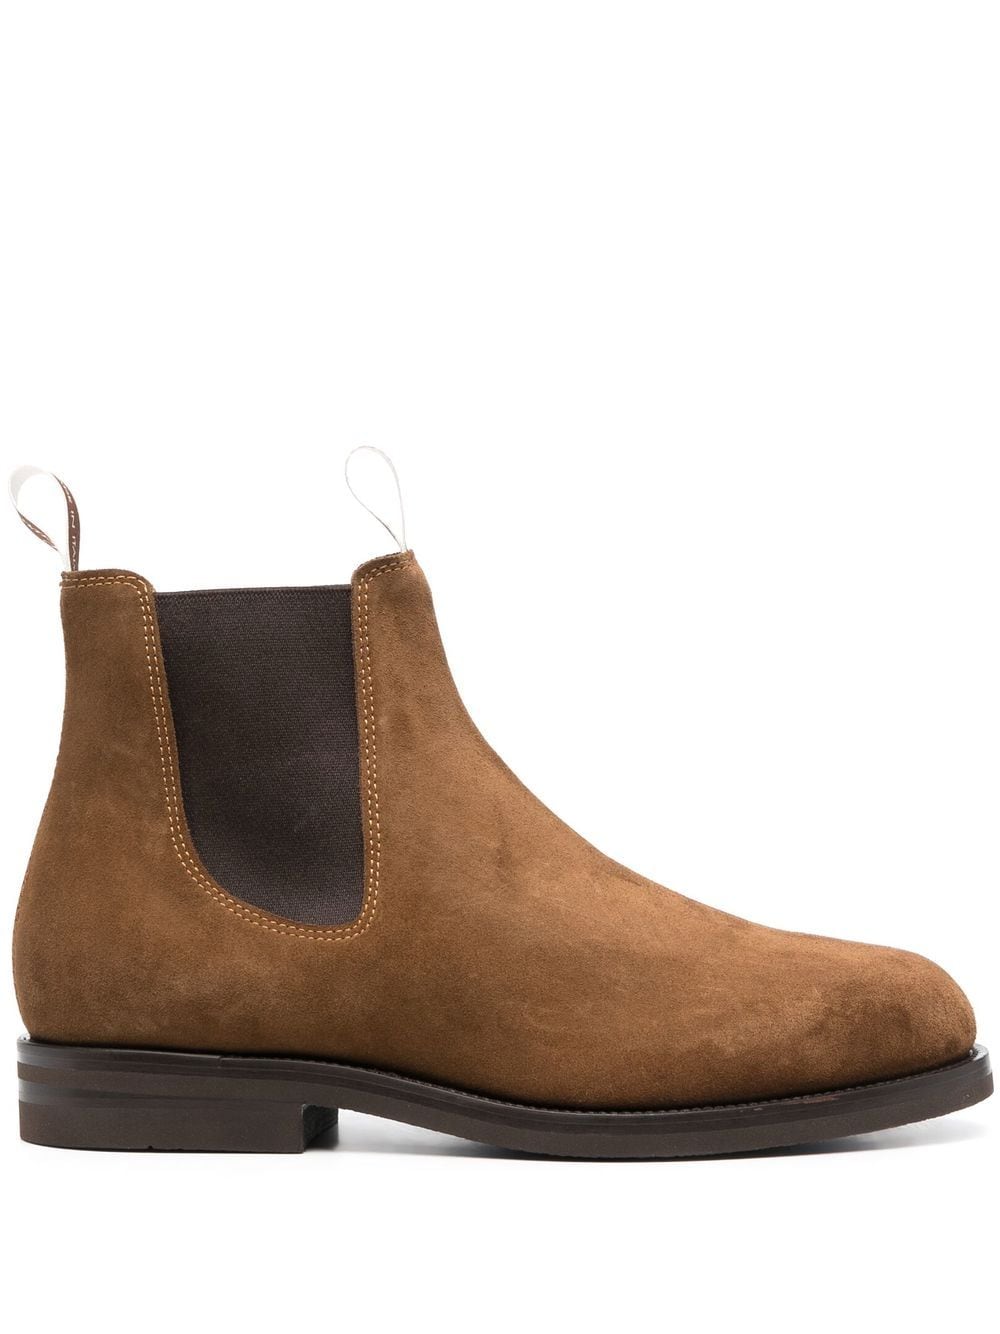 Image 1 of Scarosso William III suede Chelsea boots